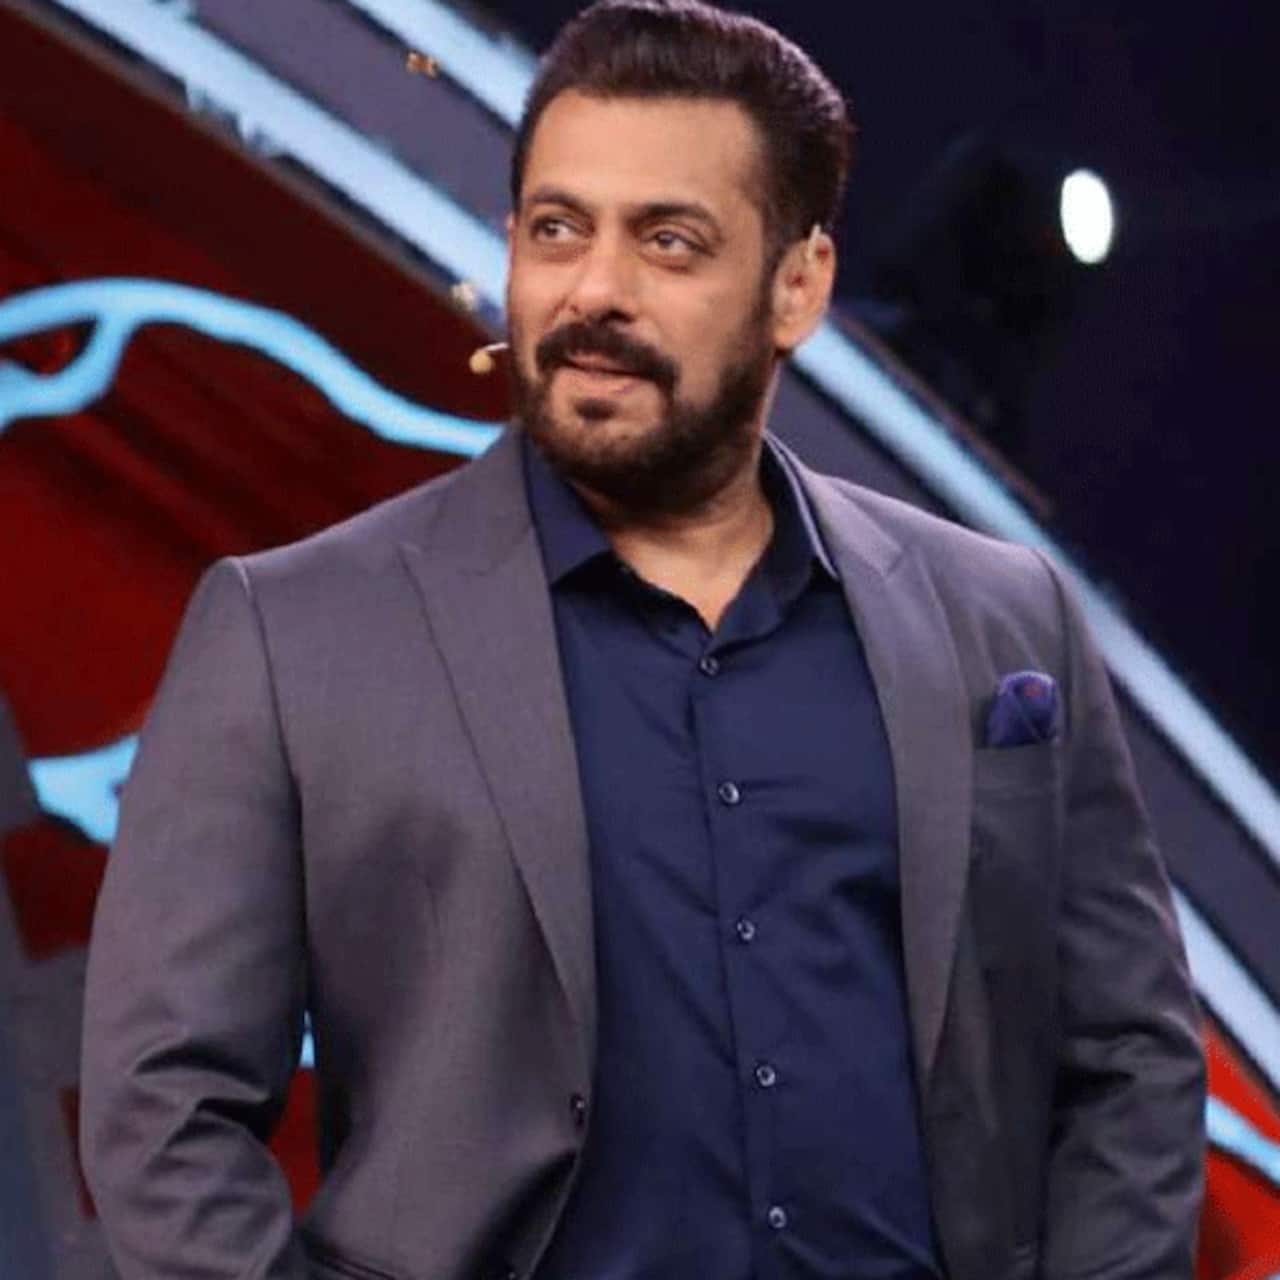 Bigg Boss 14 Fans feel Salman Khan went over the top in bashing the